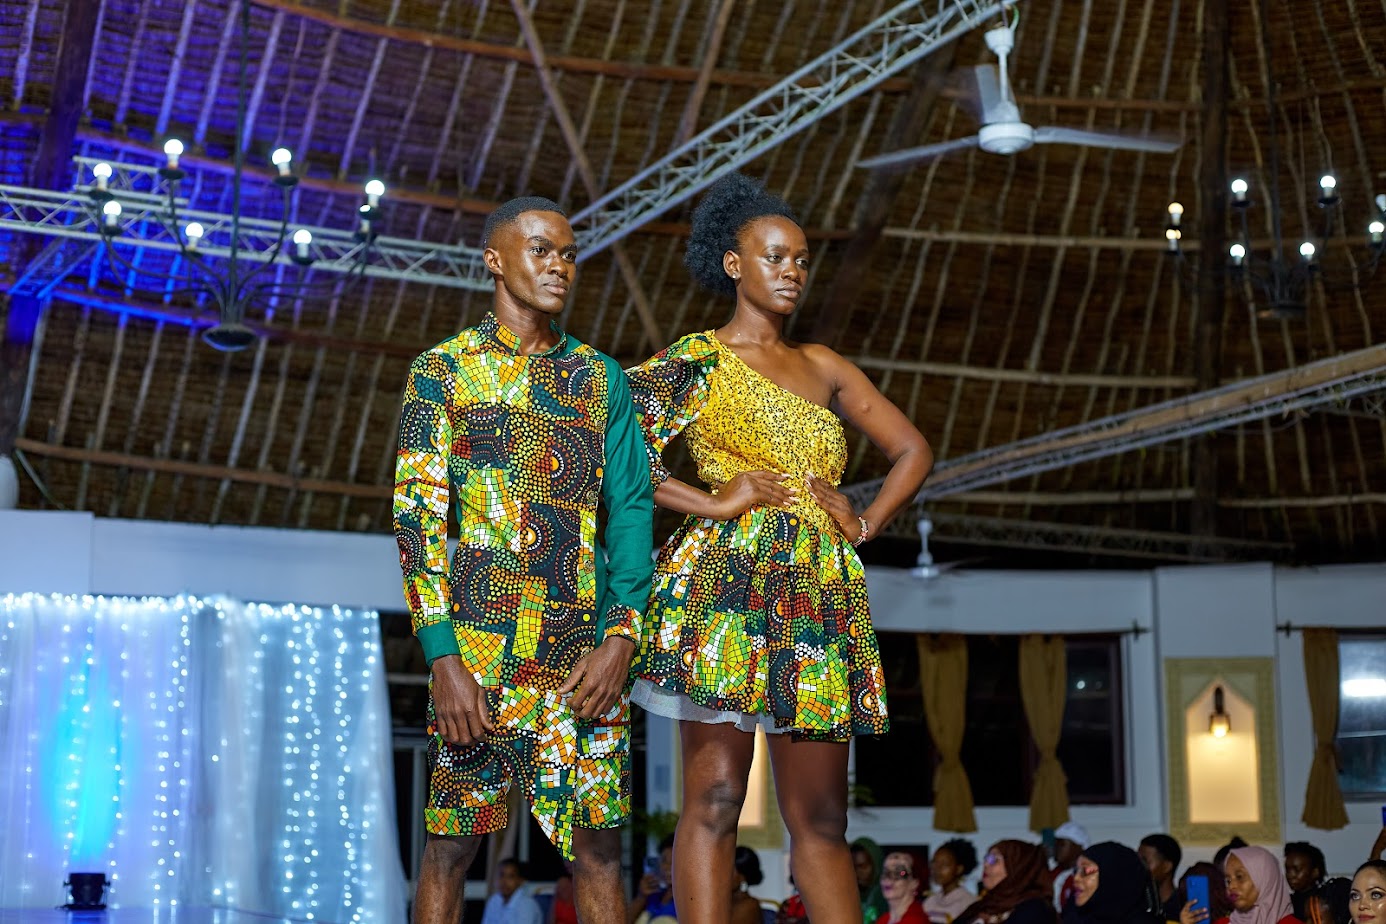 The East Africa International Fashion Week has consistently mentored, and provided a platform for young upcoming models and fashion designers since 2019